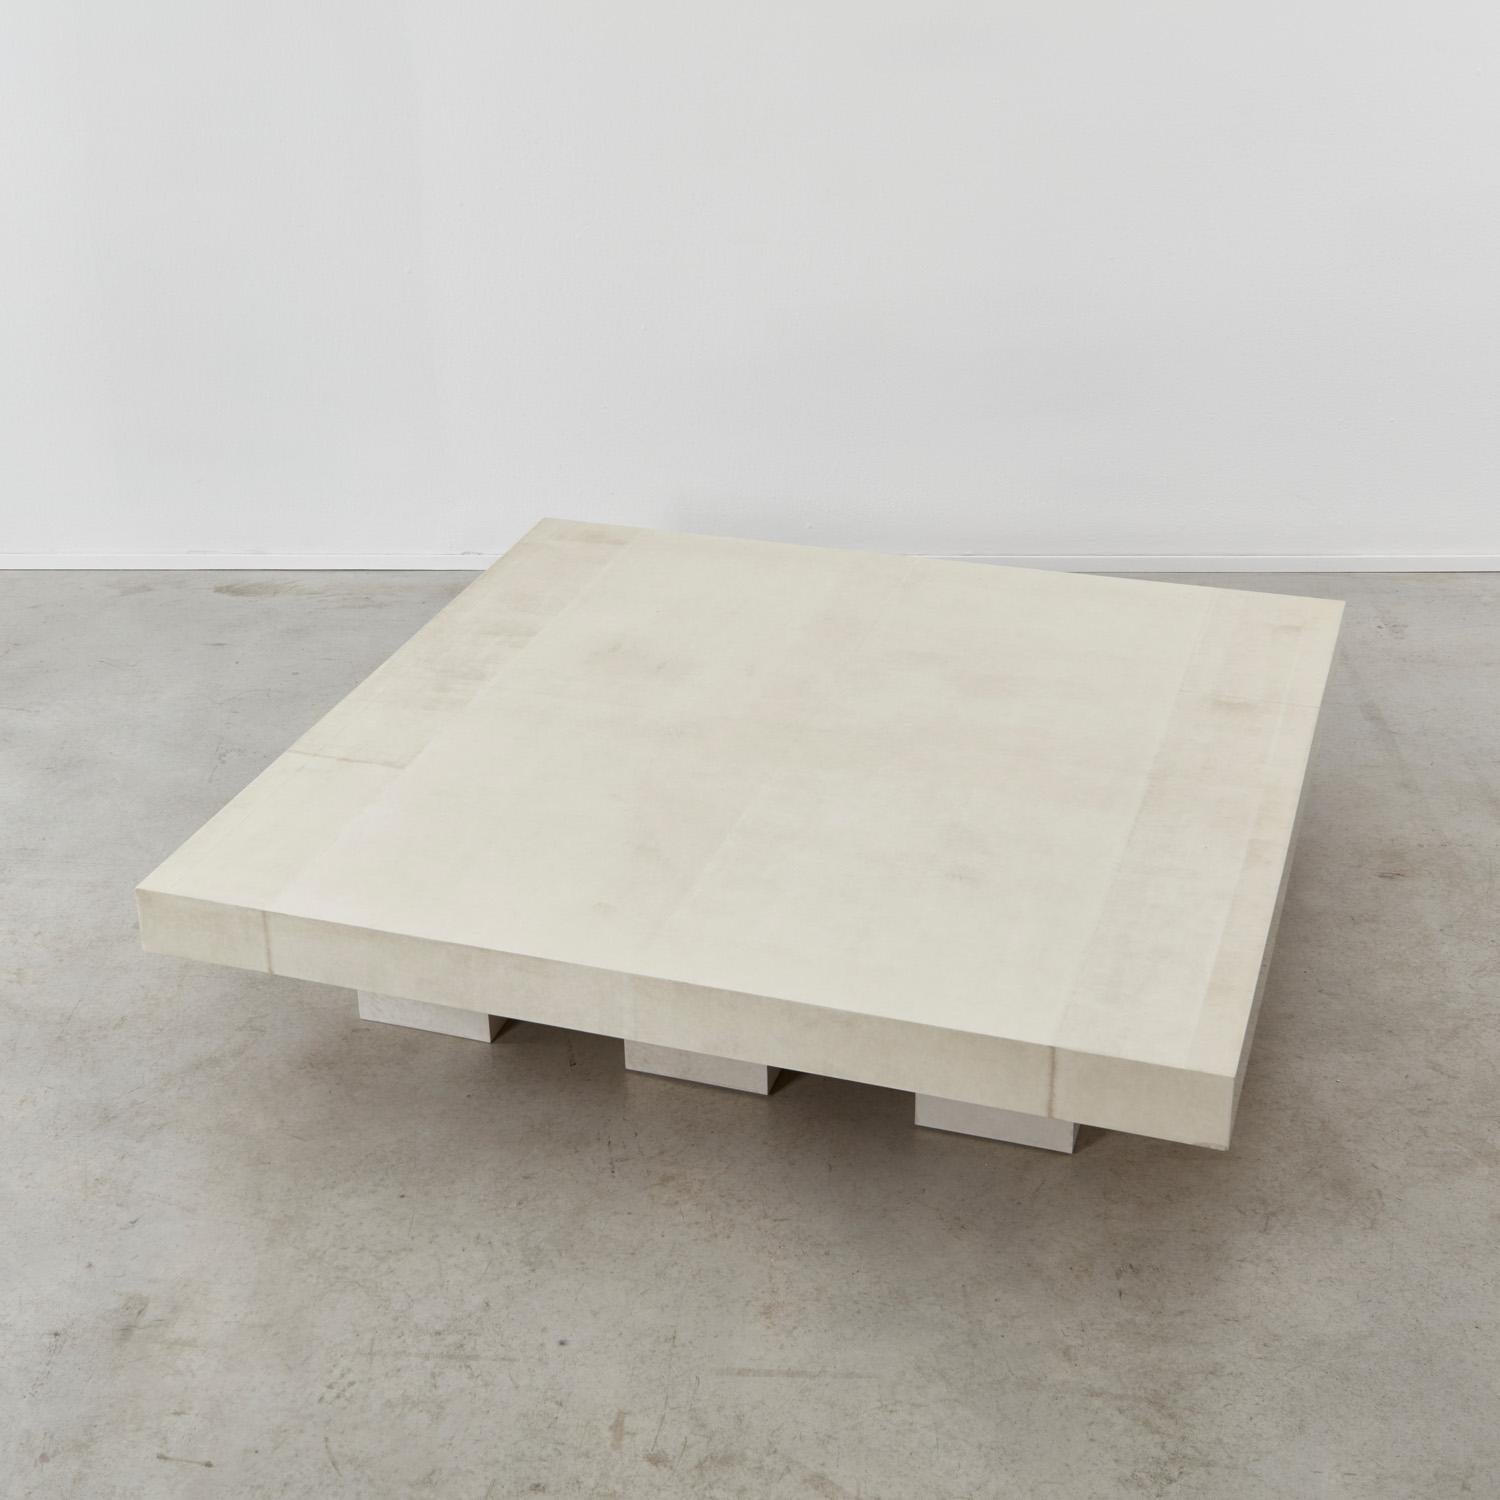 British David Horan Paper Coffee Table for Béton Brut, UK, 2022 For Sale